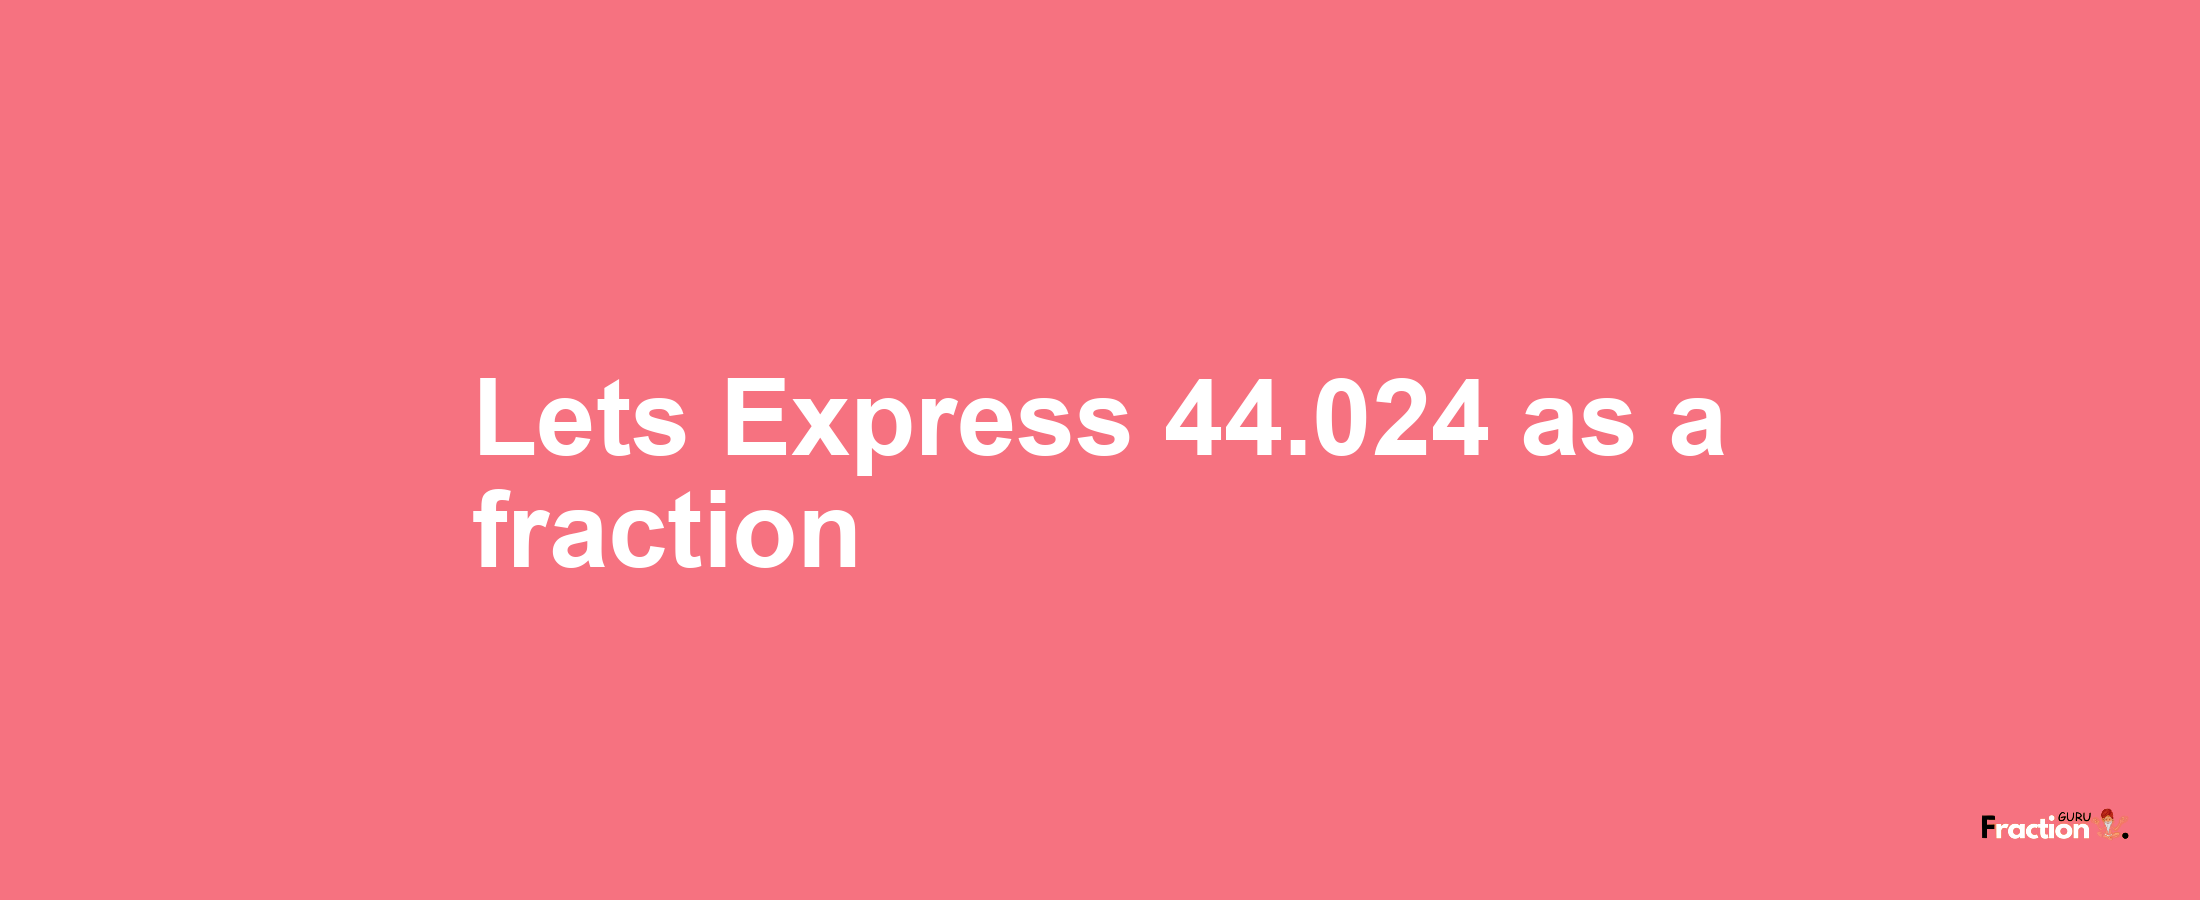 Lets Express 44.024 as afraction